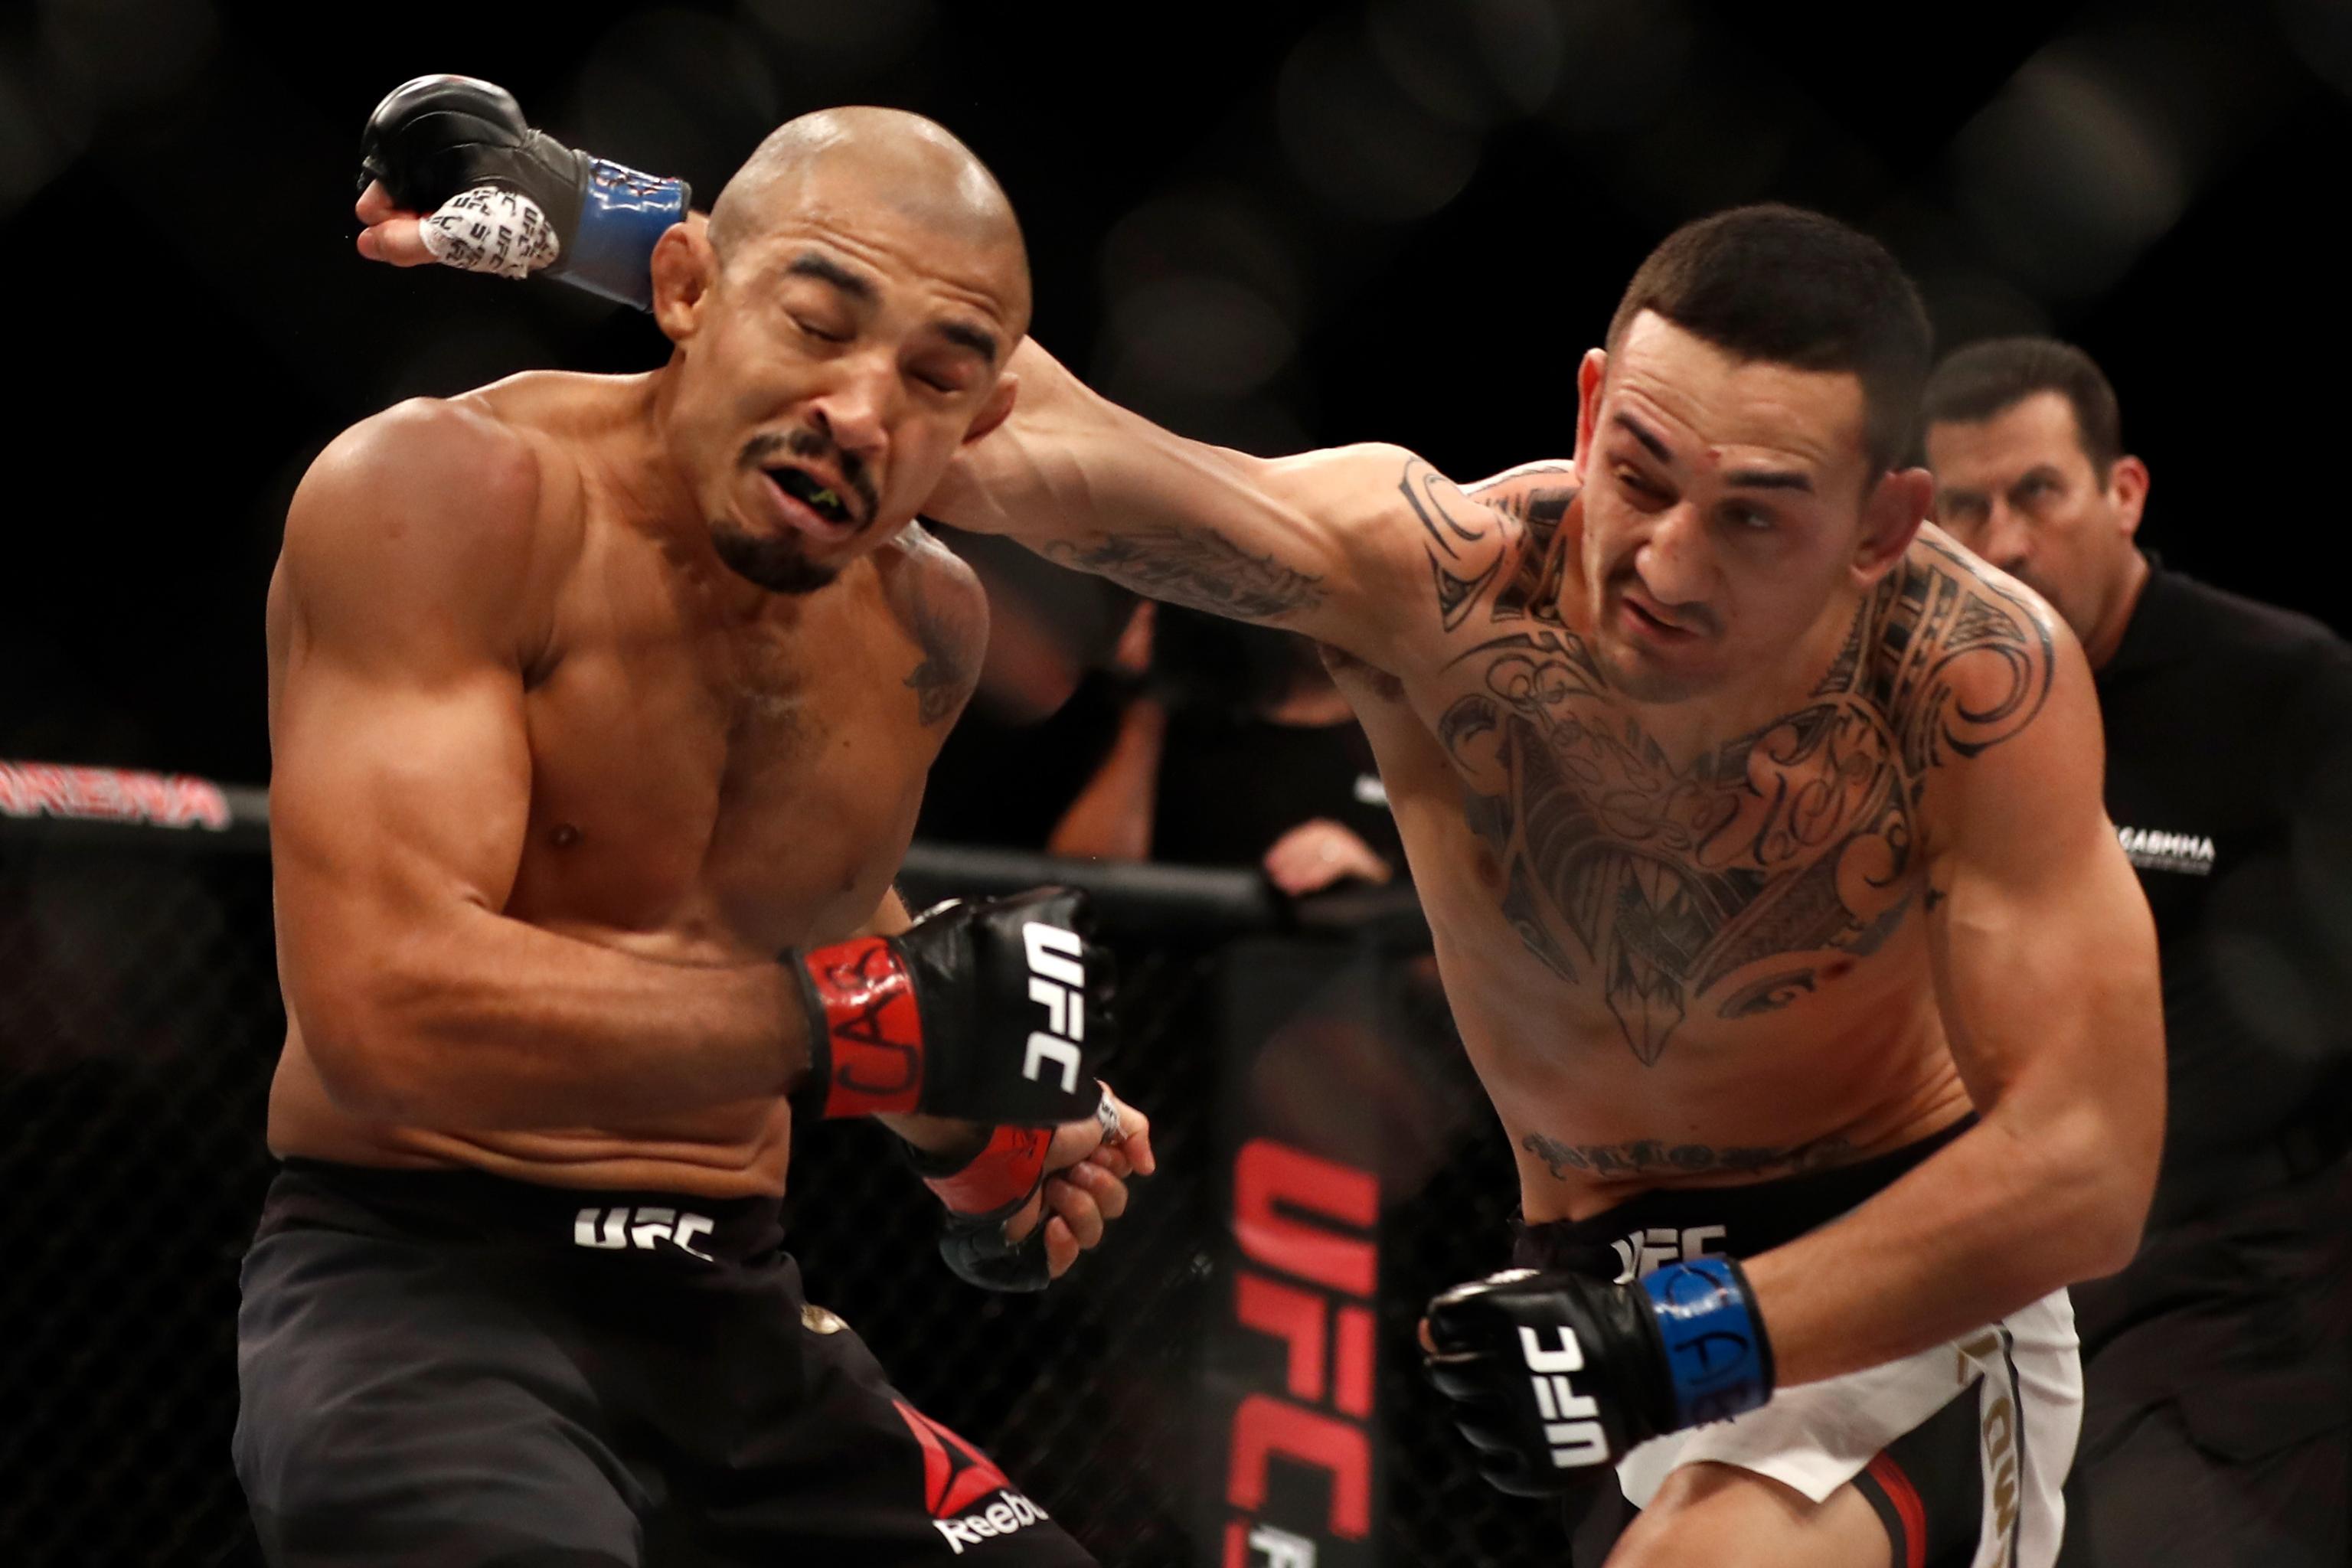 212 Results: Max Holloway Defeats Jose Aldo via TKO in Main Event | Bleacher Report | Latest Videos and Highlights